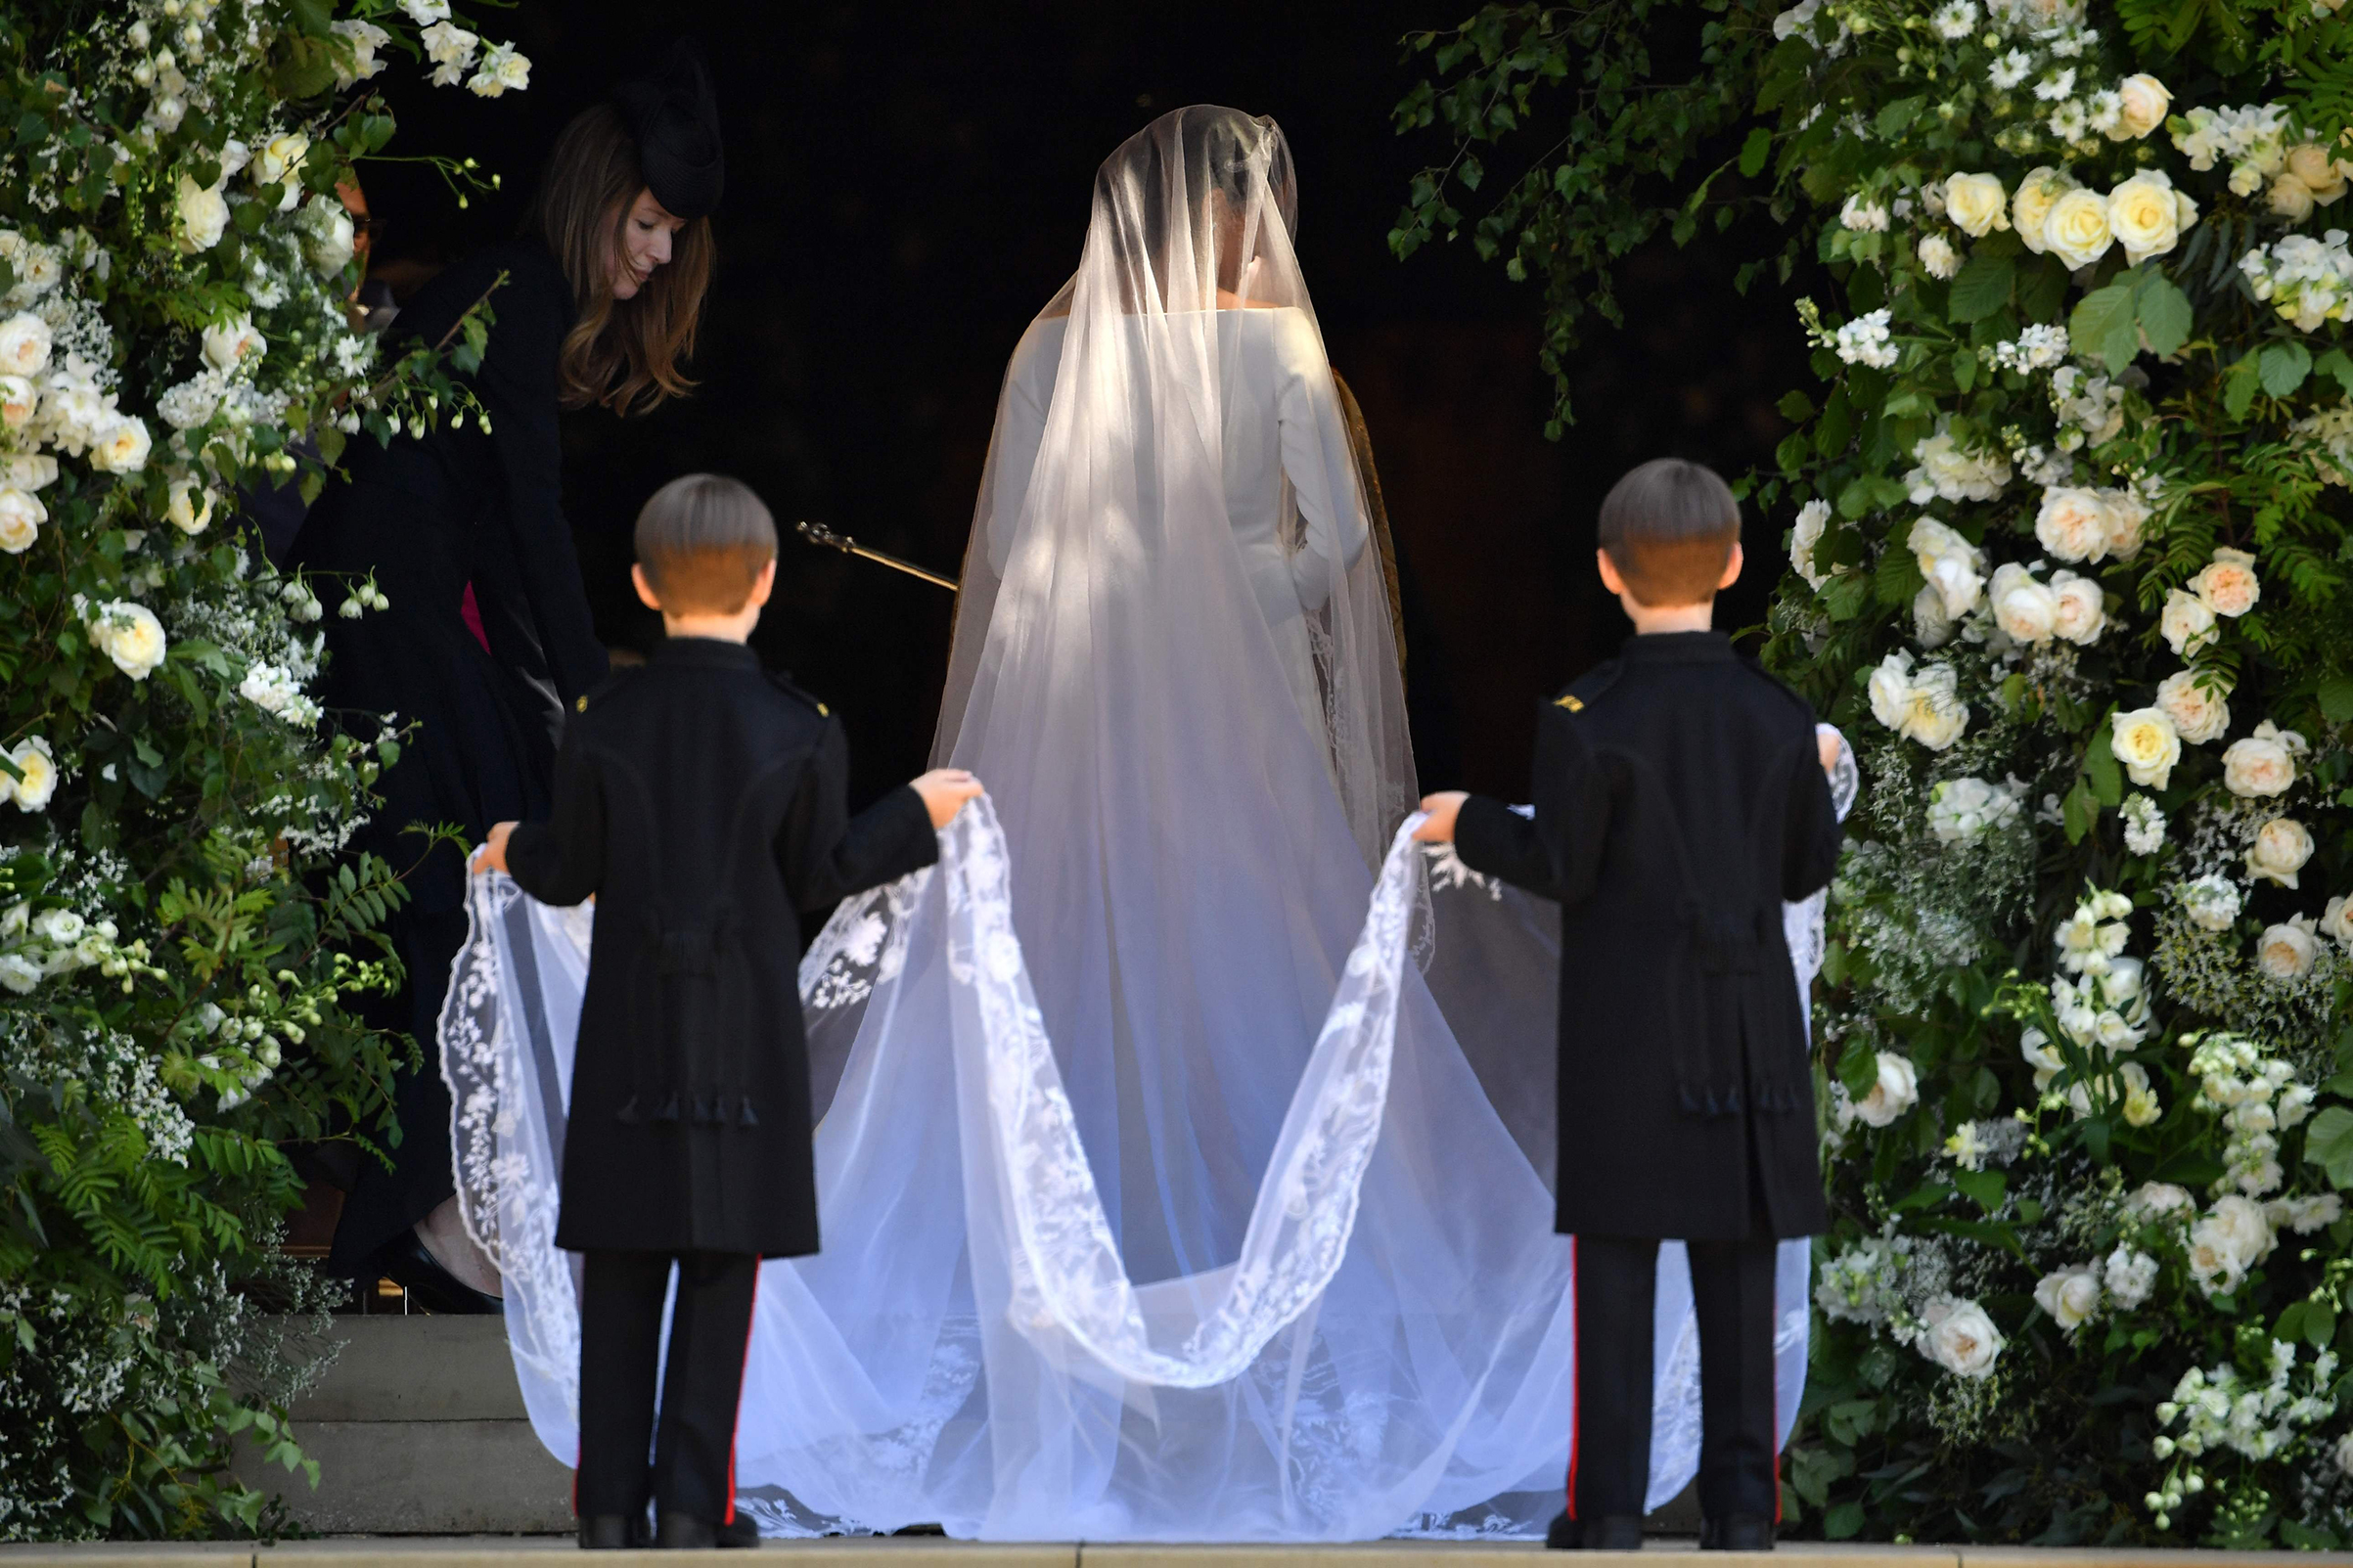 Meghan Markle arrives for the wedding ceremony to marry Britain's Prince Harry, Duke of Sussex, at St George's Chapel, Windsor Castle, May 19, 2018. (Ben Stall—AFP/Getty Images)